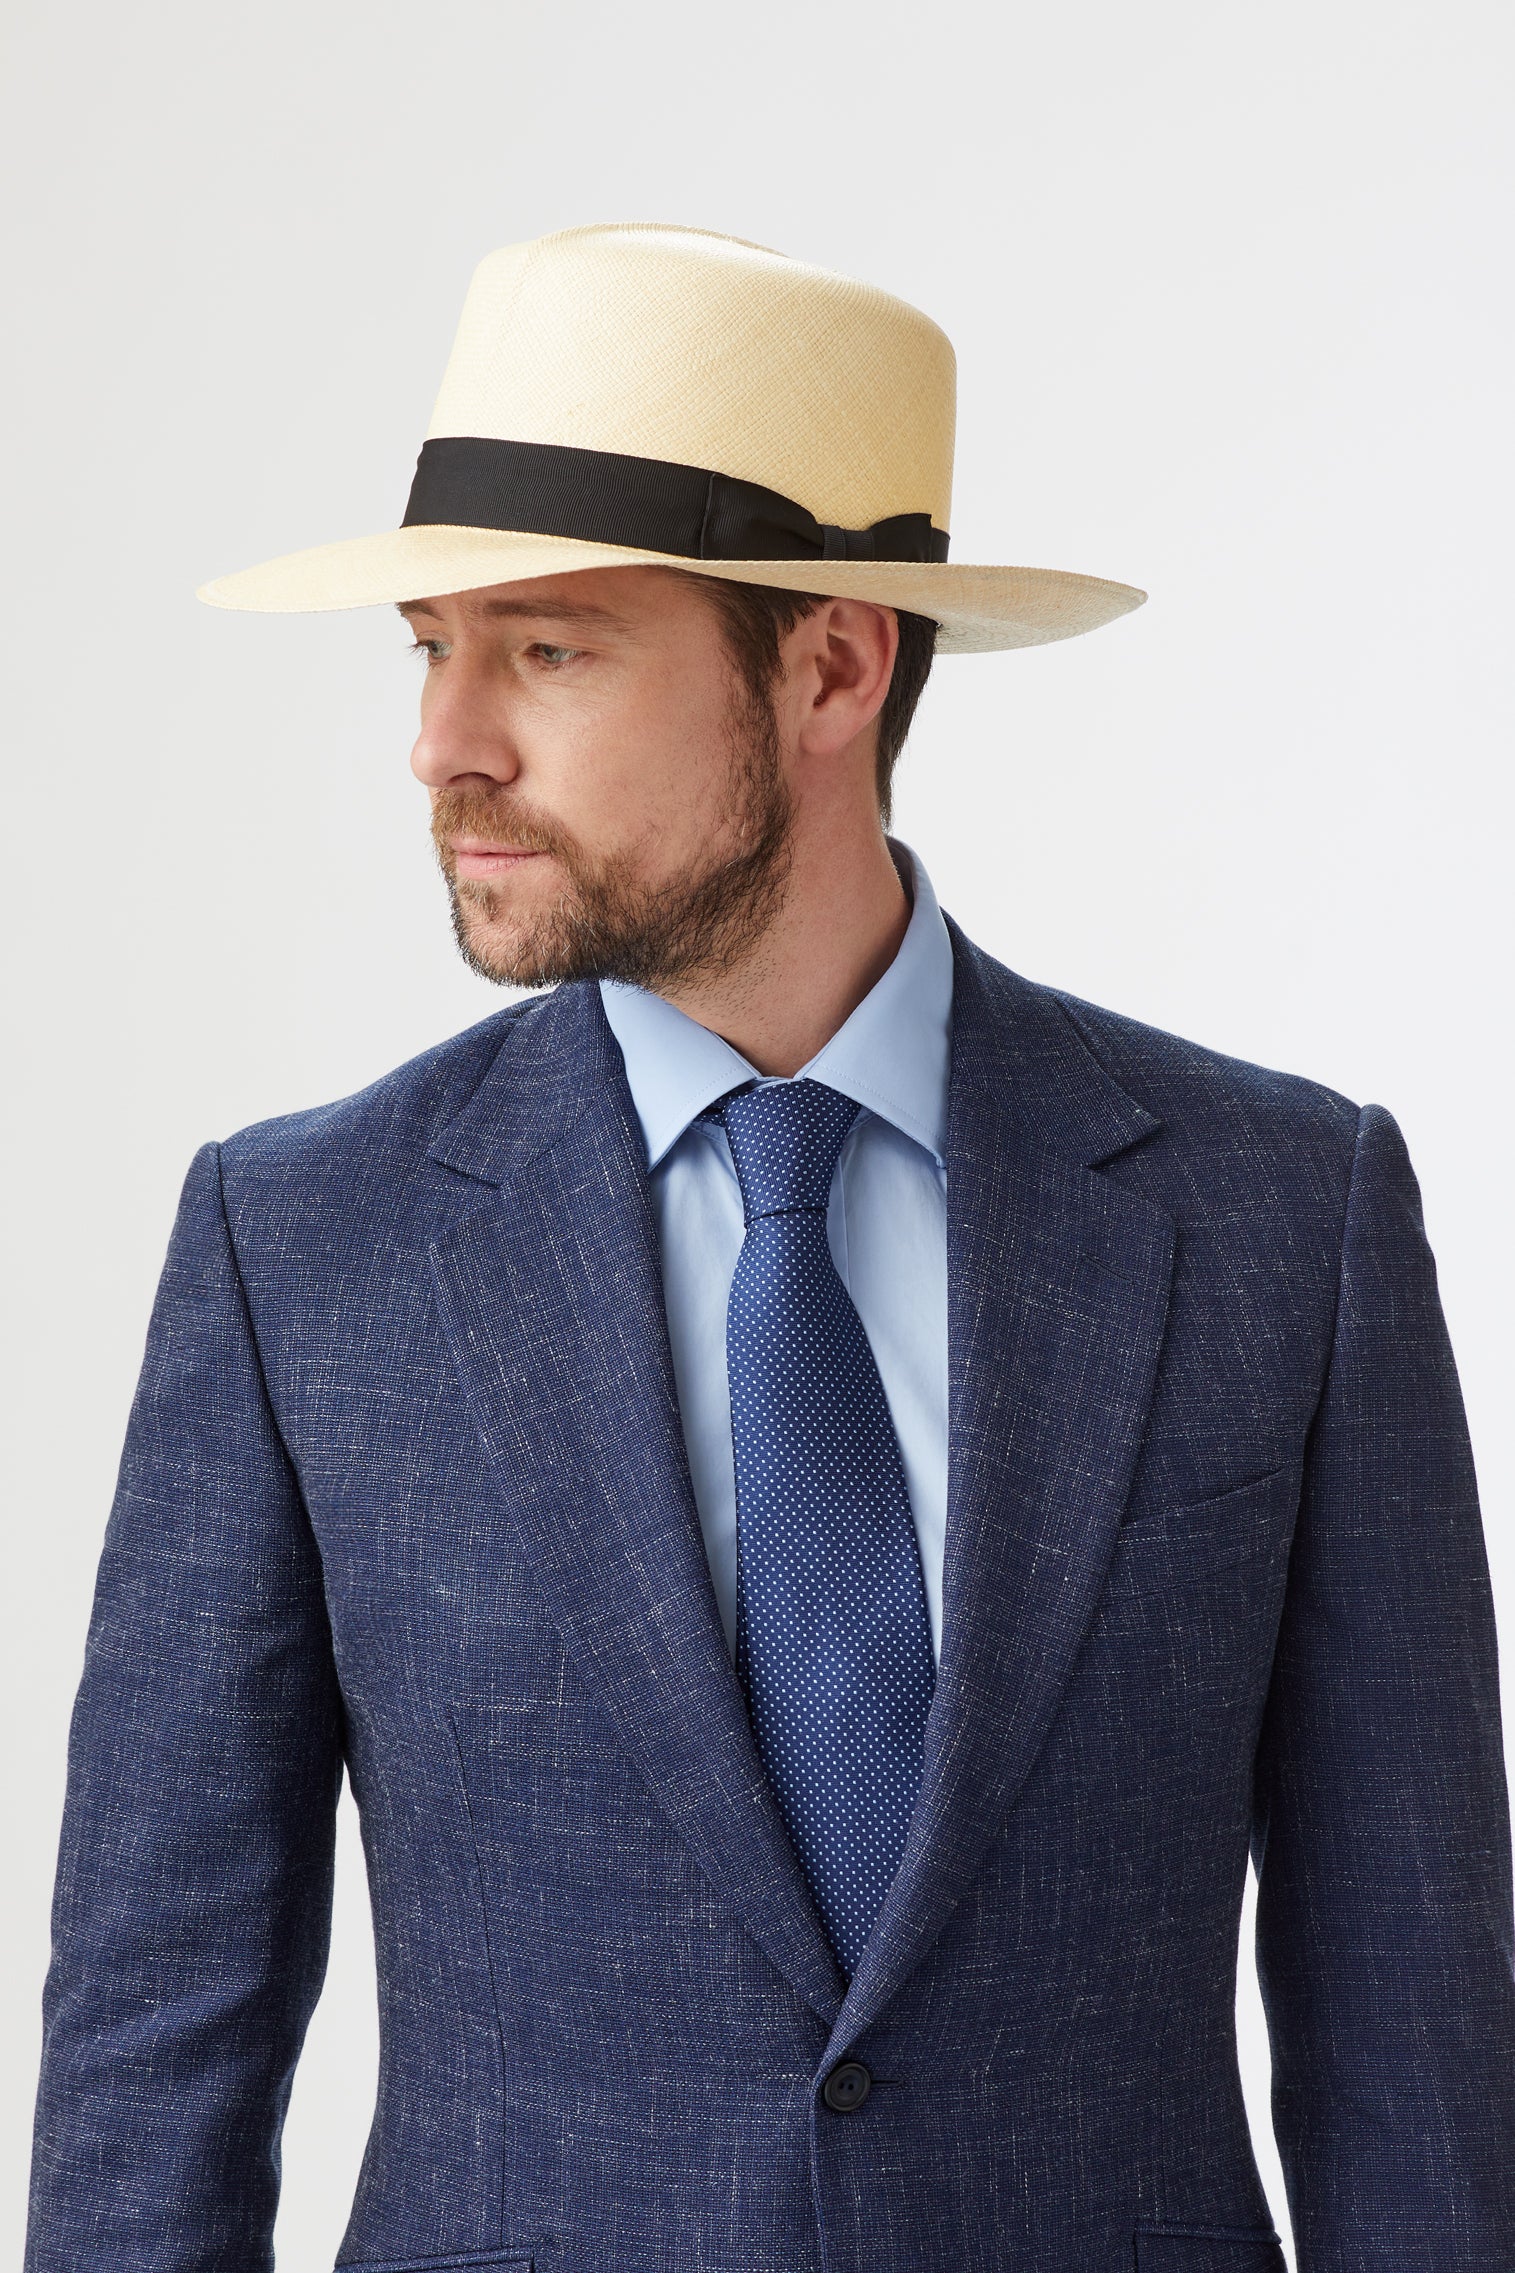 Men's Rollable Panama - Hats for Tall People - Lock & Co. Hatters London UK